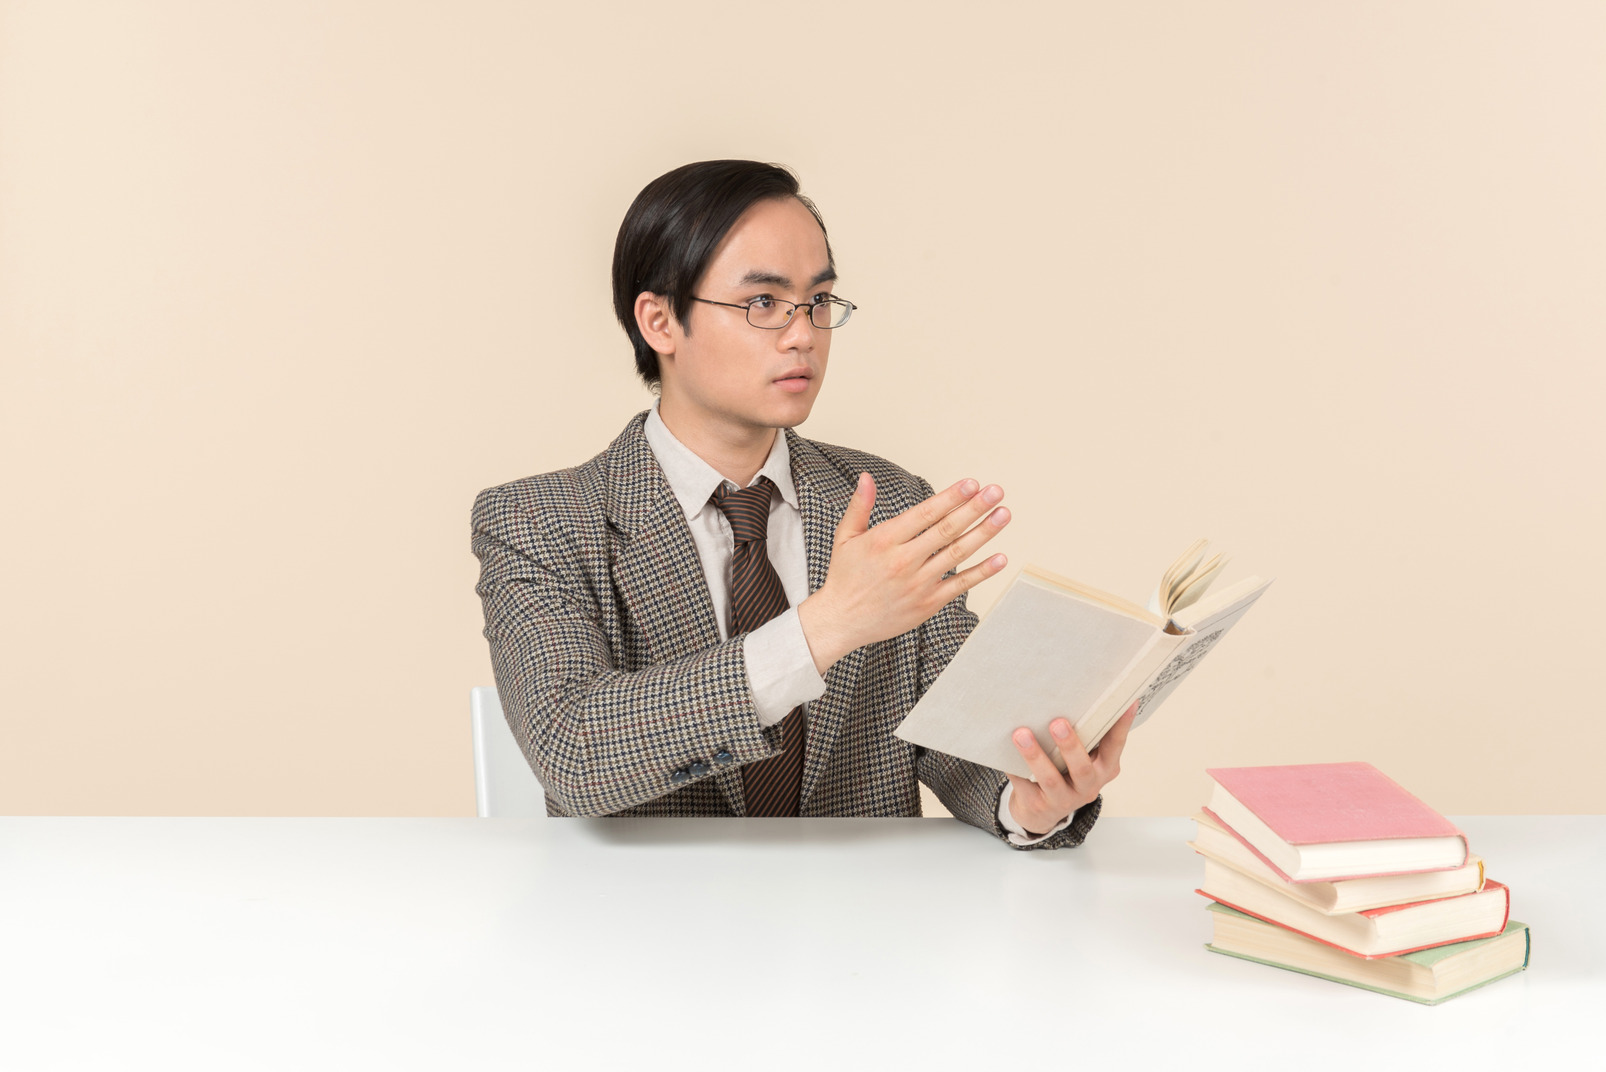 An asian teacher in a checkered suit, a tie and a book in his hand, working with the class